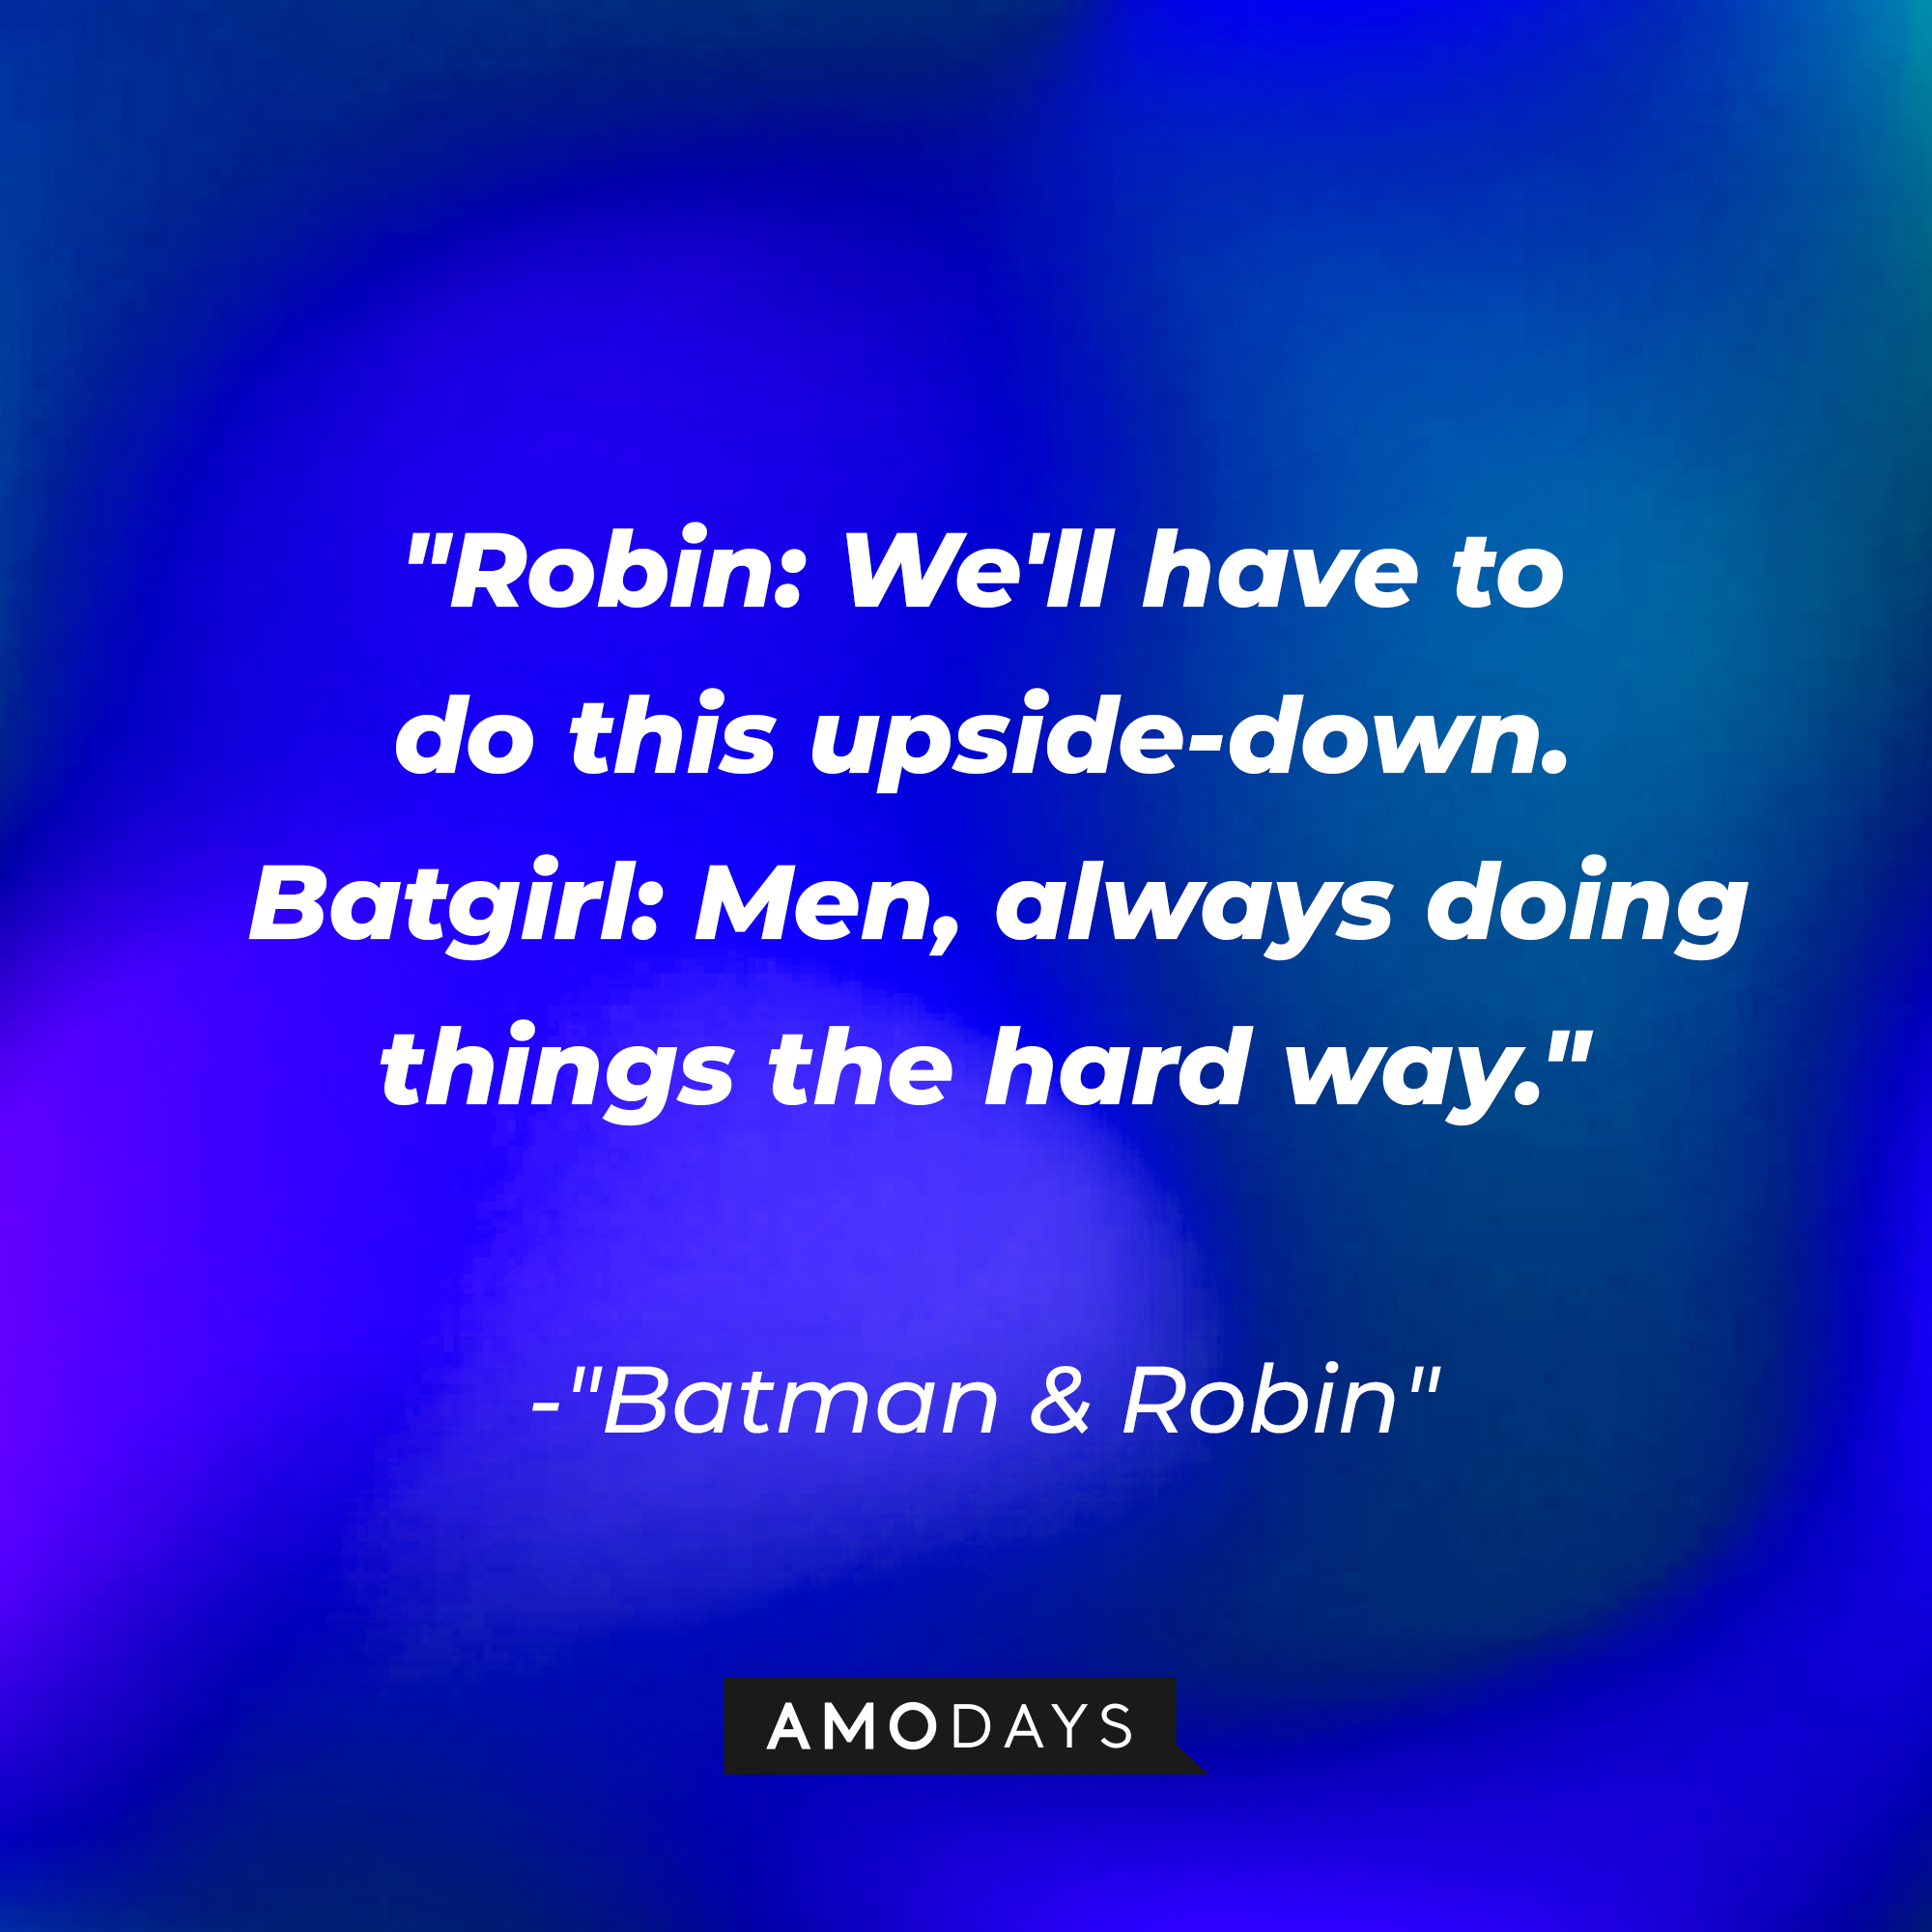 A dialogue from the "Batman & Robin" film: "Robin: We'll have to do this upside-down. Batgirl: Men, always doing things the hard way." | Source: AmoDays